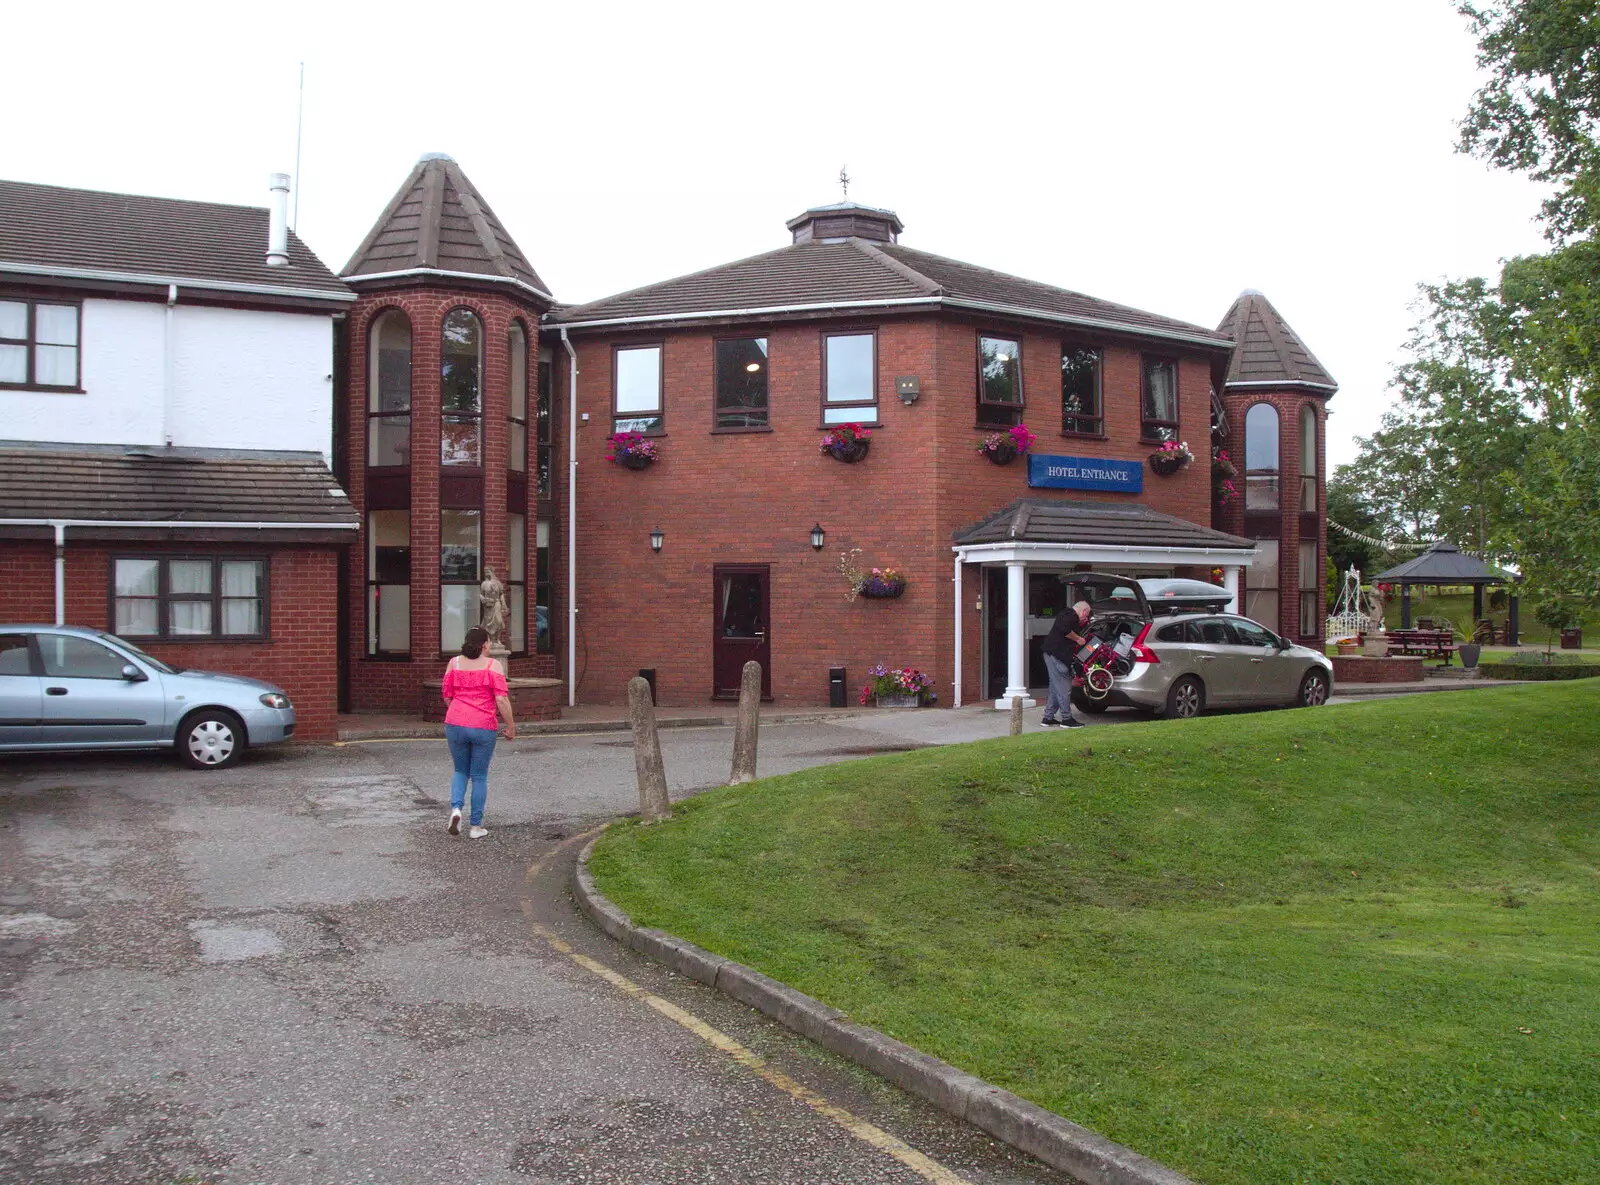 The Beaufort Park Hotel in Mold, from The Summer Trip to Ireland, Monkstown, Co. Dublin, Ireland - 9th August 2019